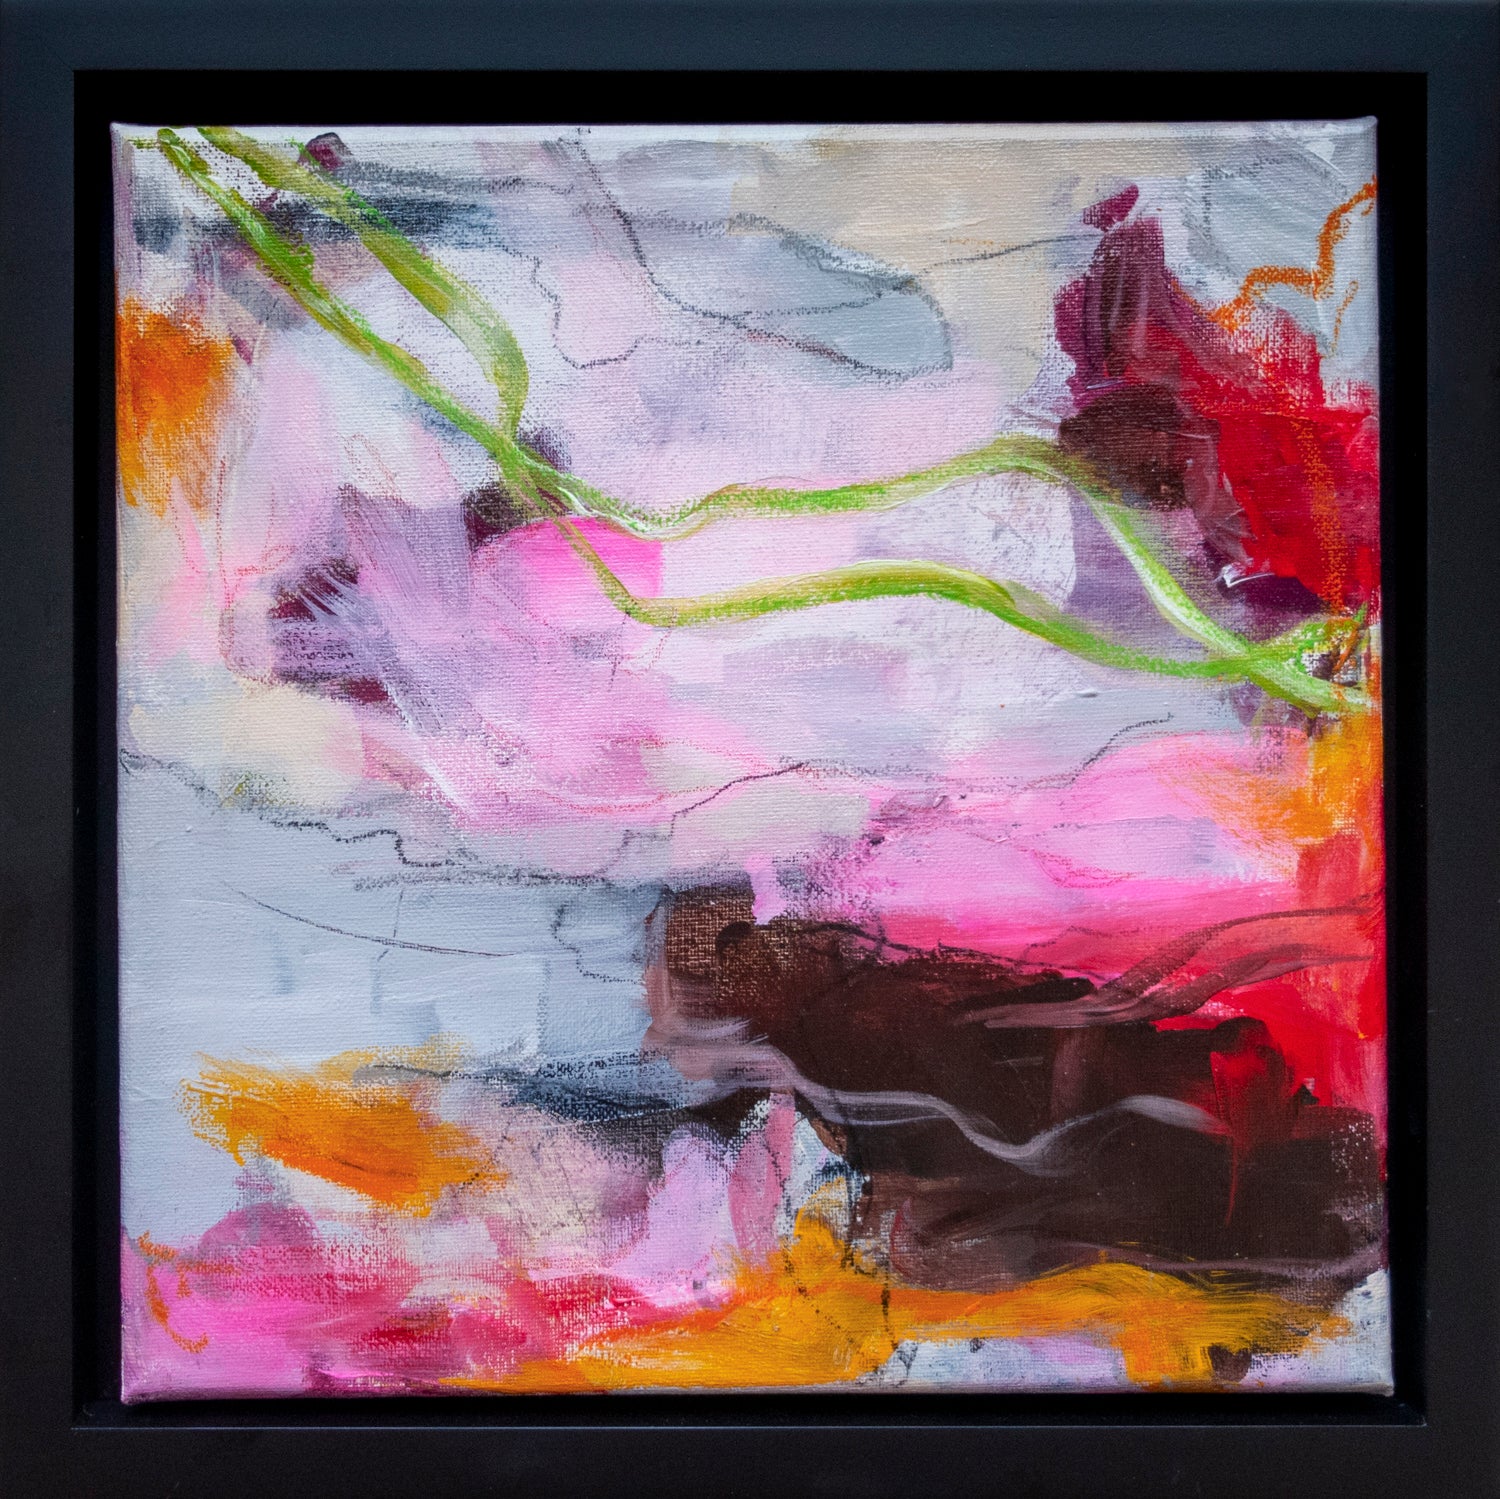 Colorful abstract painting using acrylic paint titled 'Maia' by artist Steffi Möllers; canvas measures 12"x12"; with black wood frame measures 13"x13"